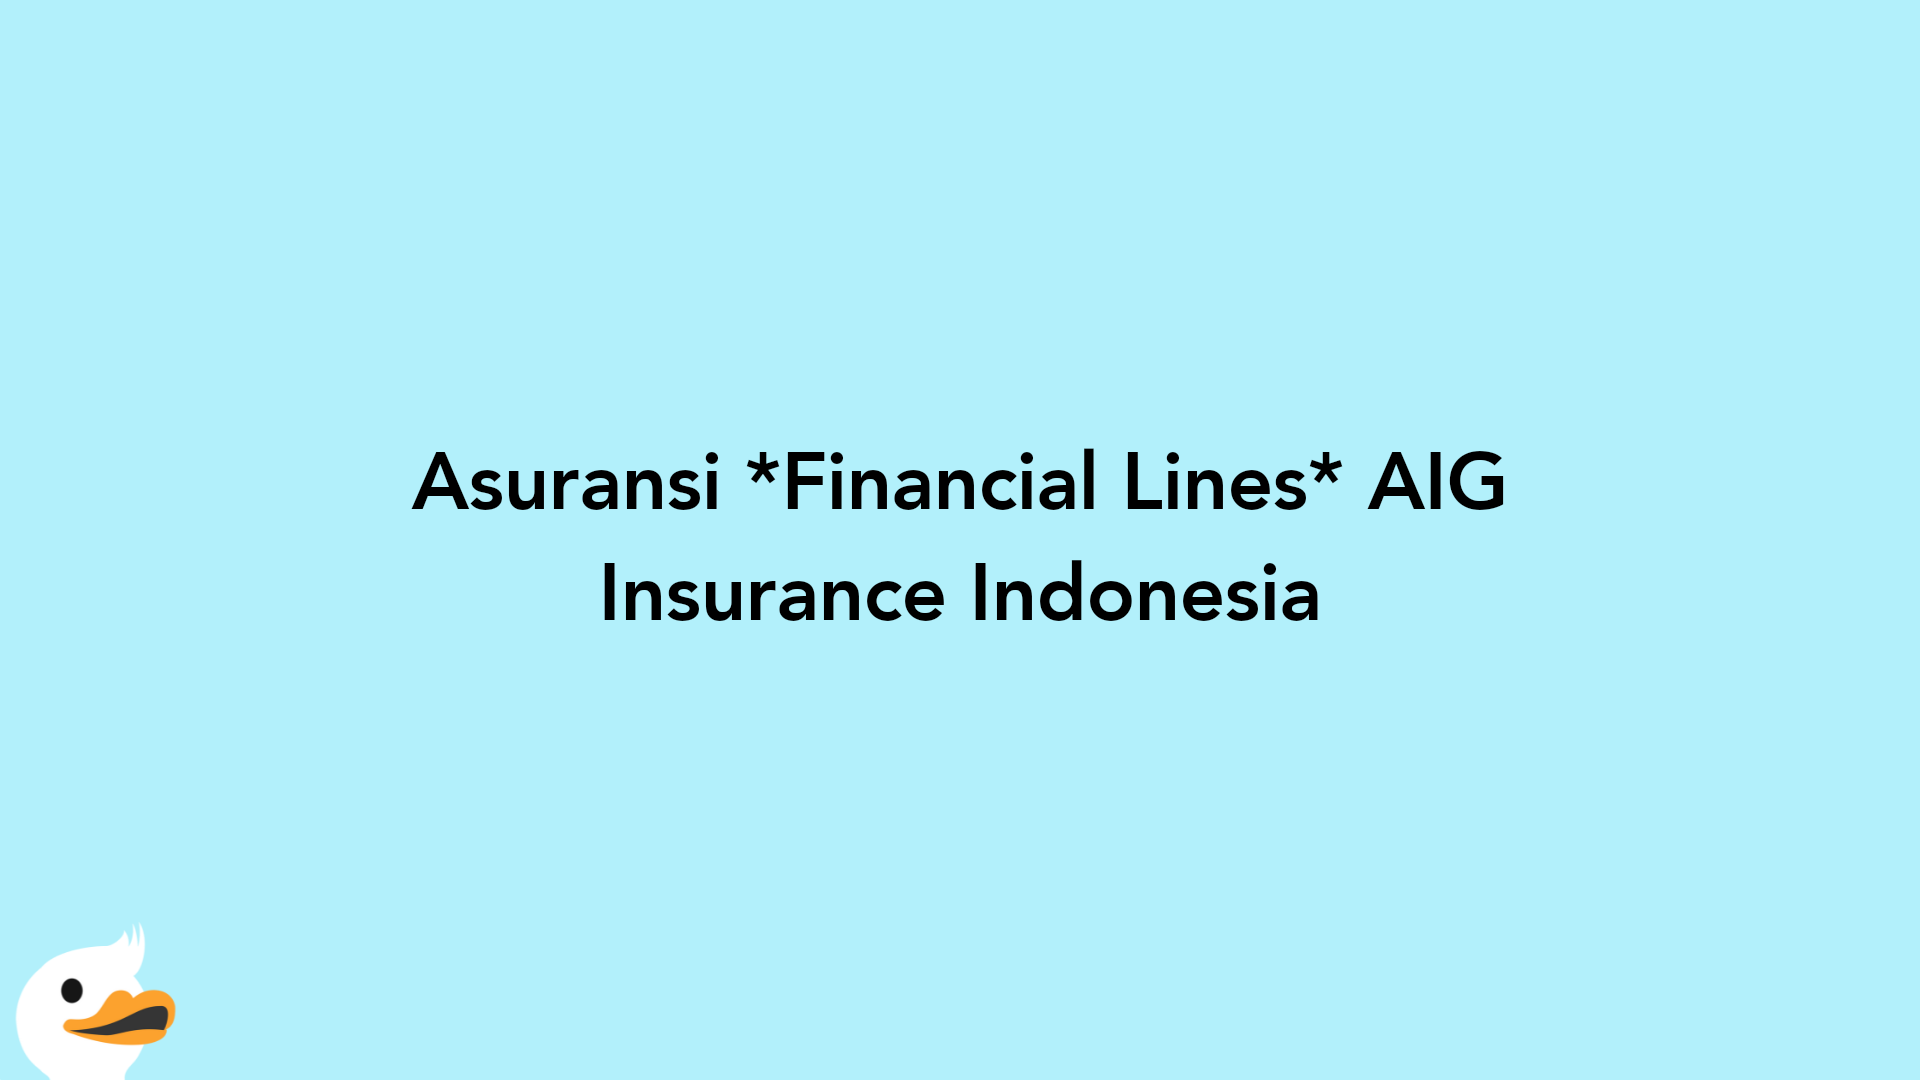 Asuransi Financial Lines AIG Insurance Indonesia